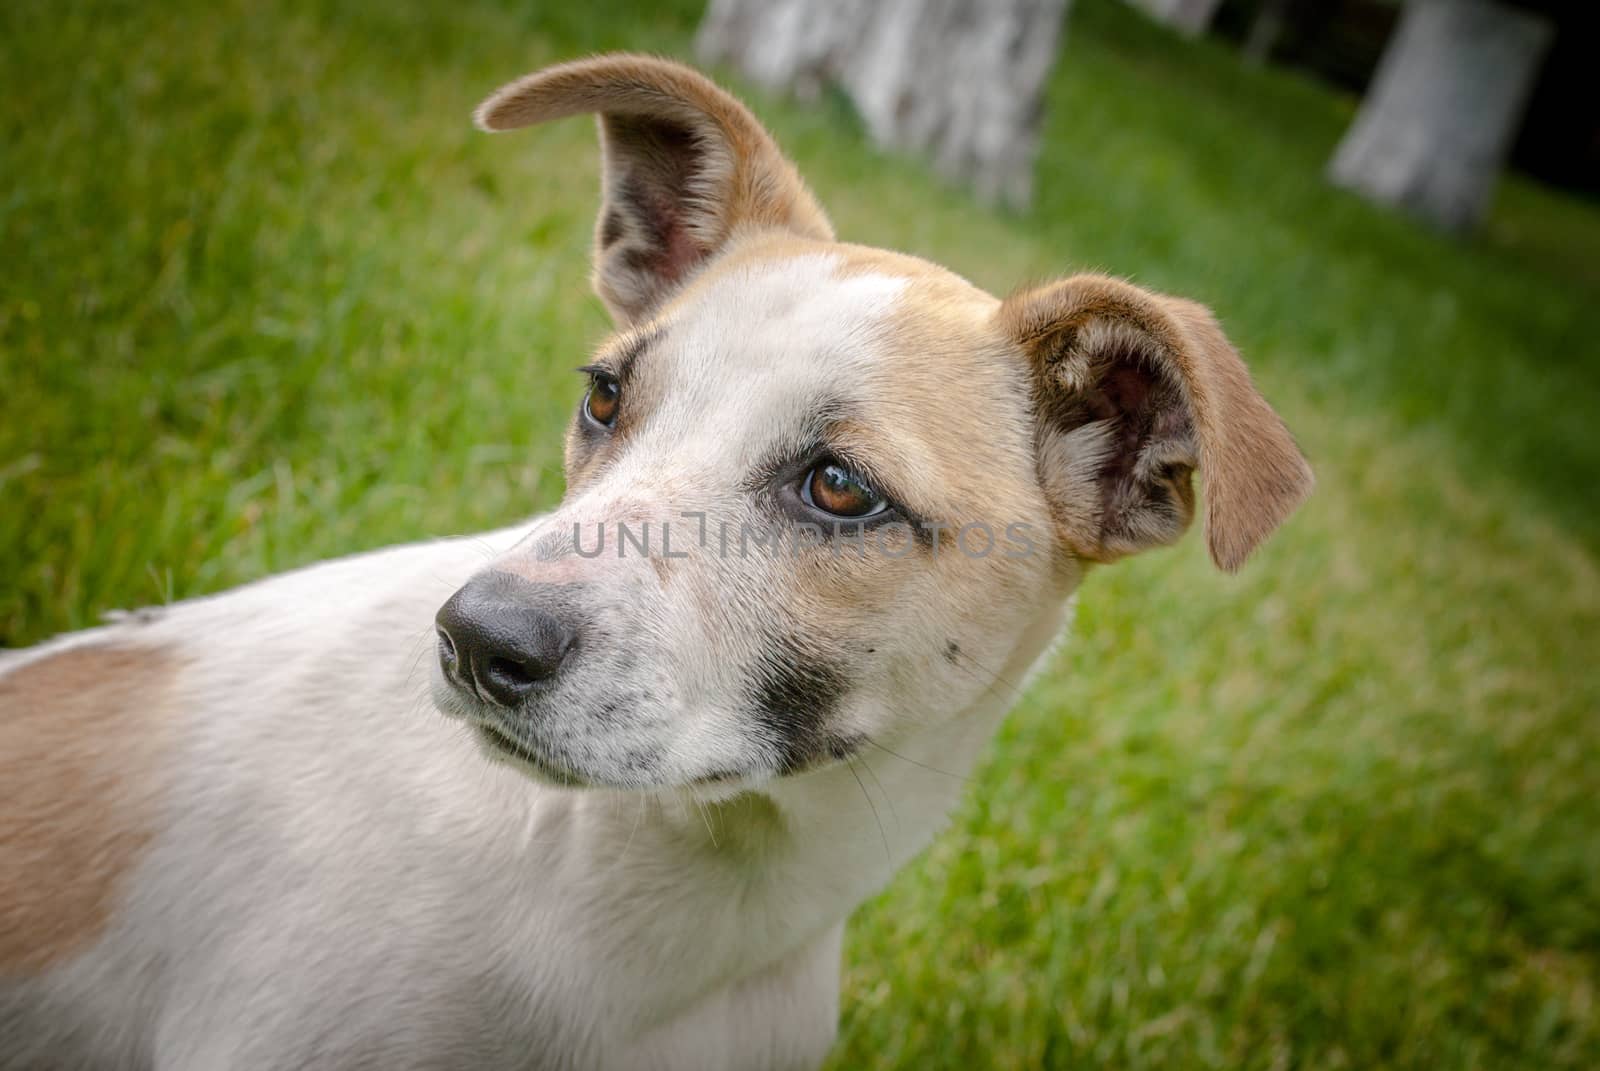 homeless dog with adorable face, cute puppy, anxiety in eyes by uvisni